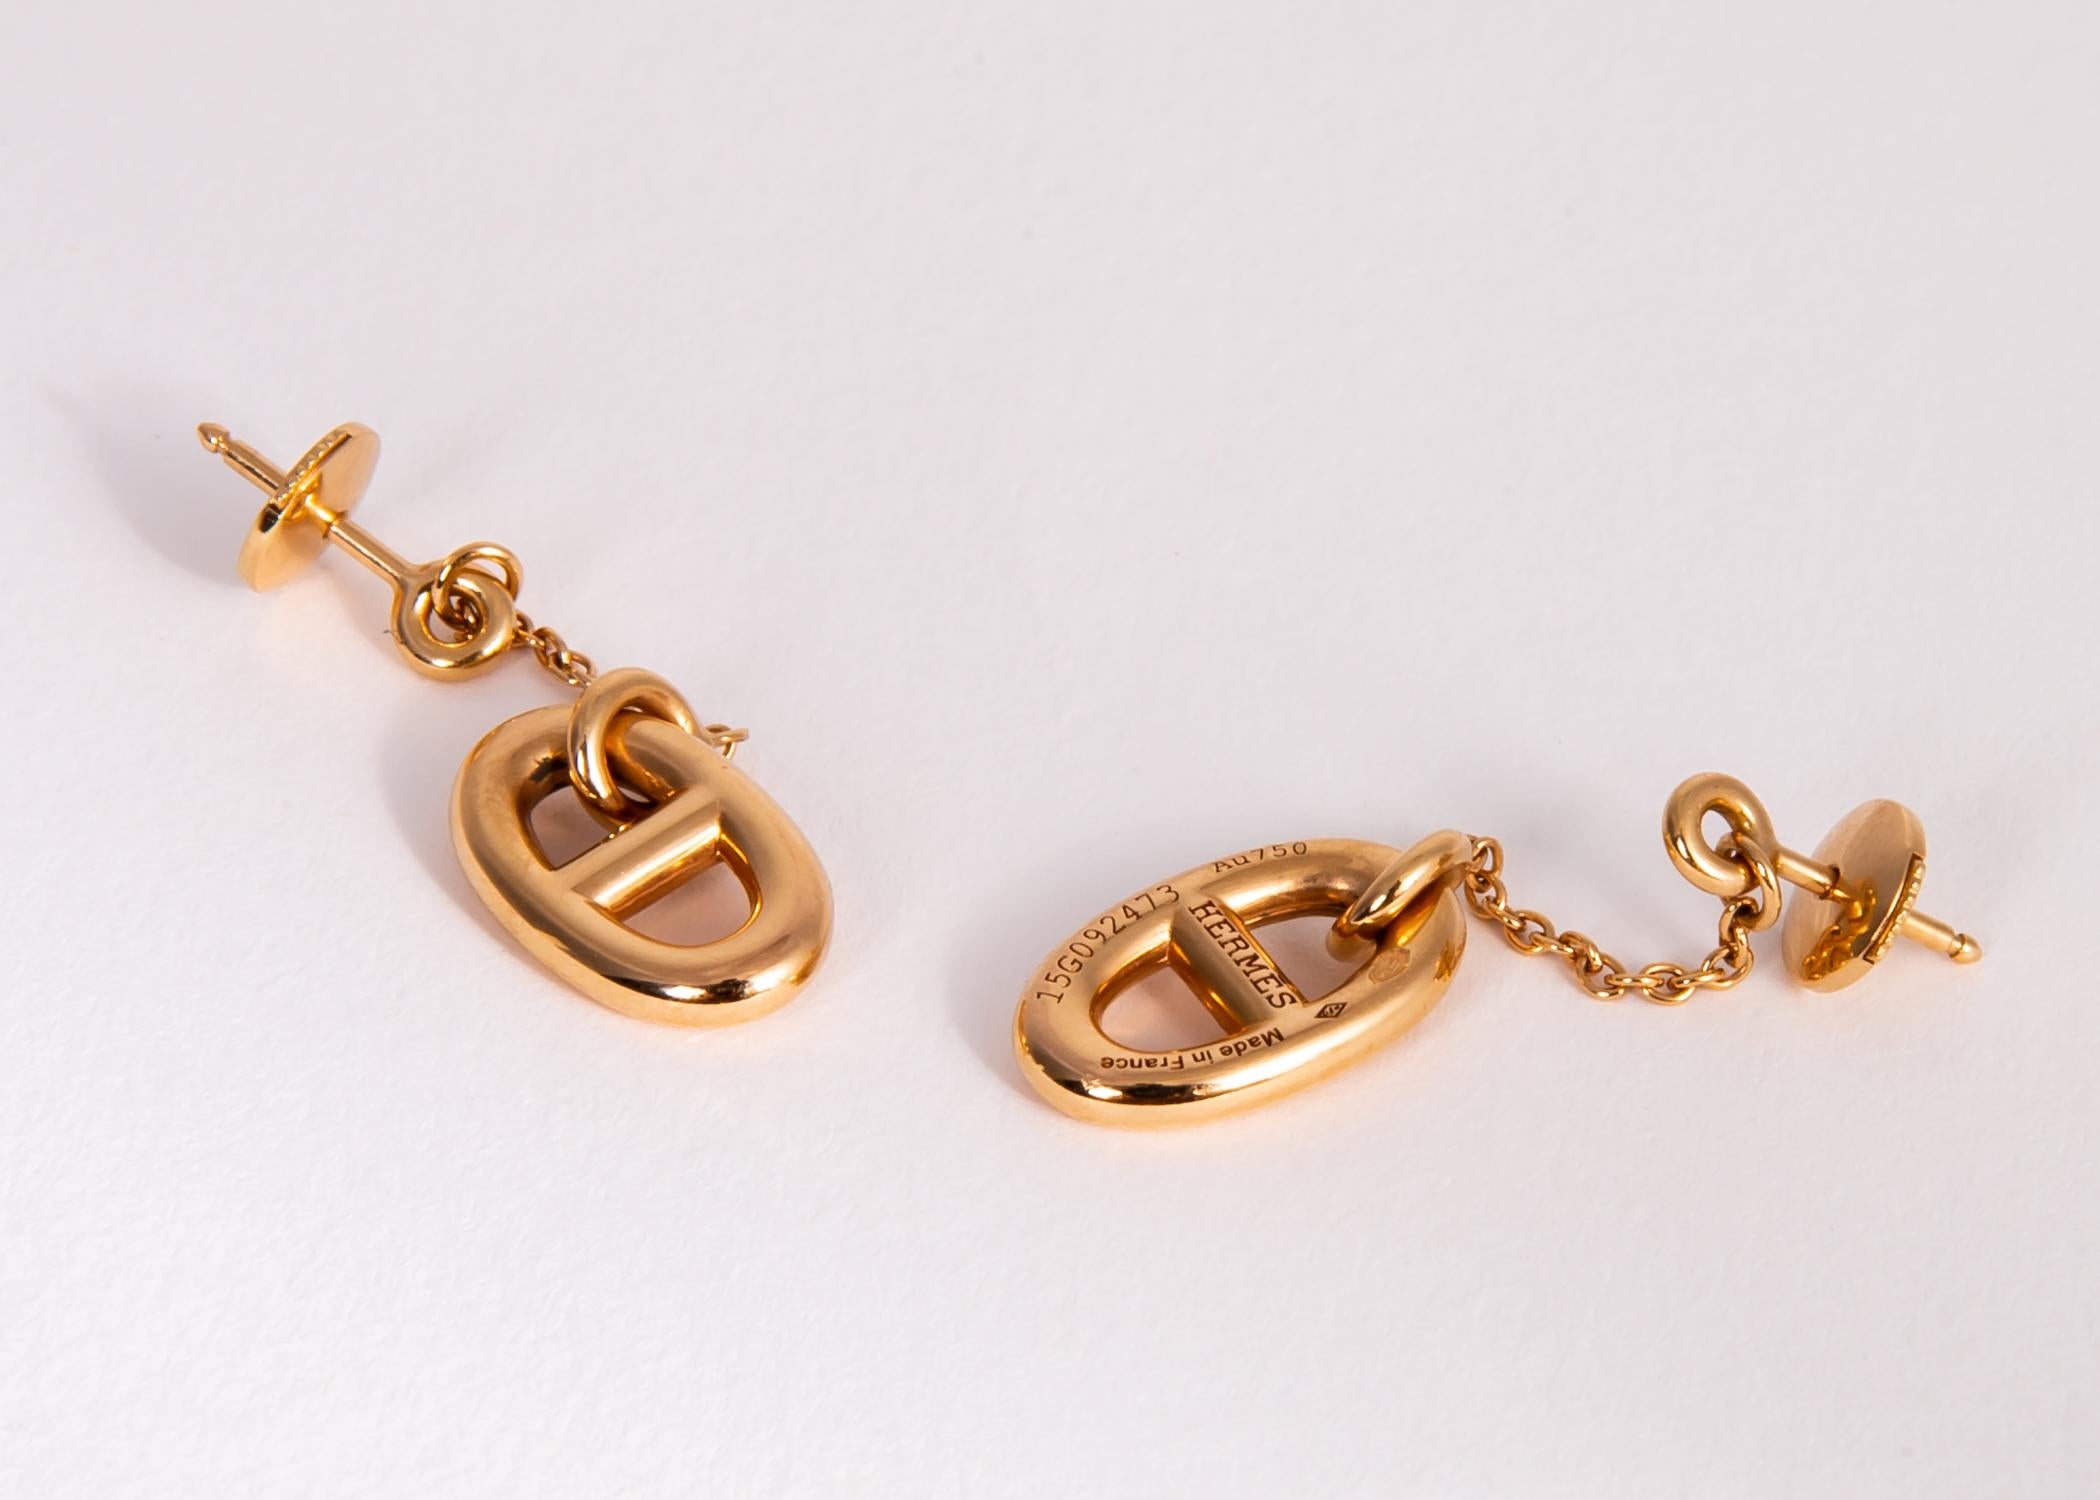 A classic Hermes design. This simple chic earring measures 1 3/8's in length. 